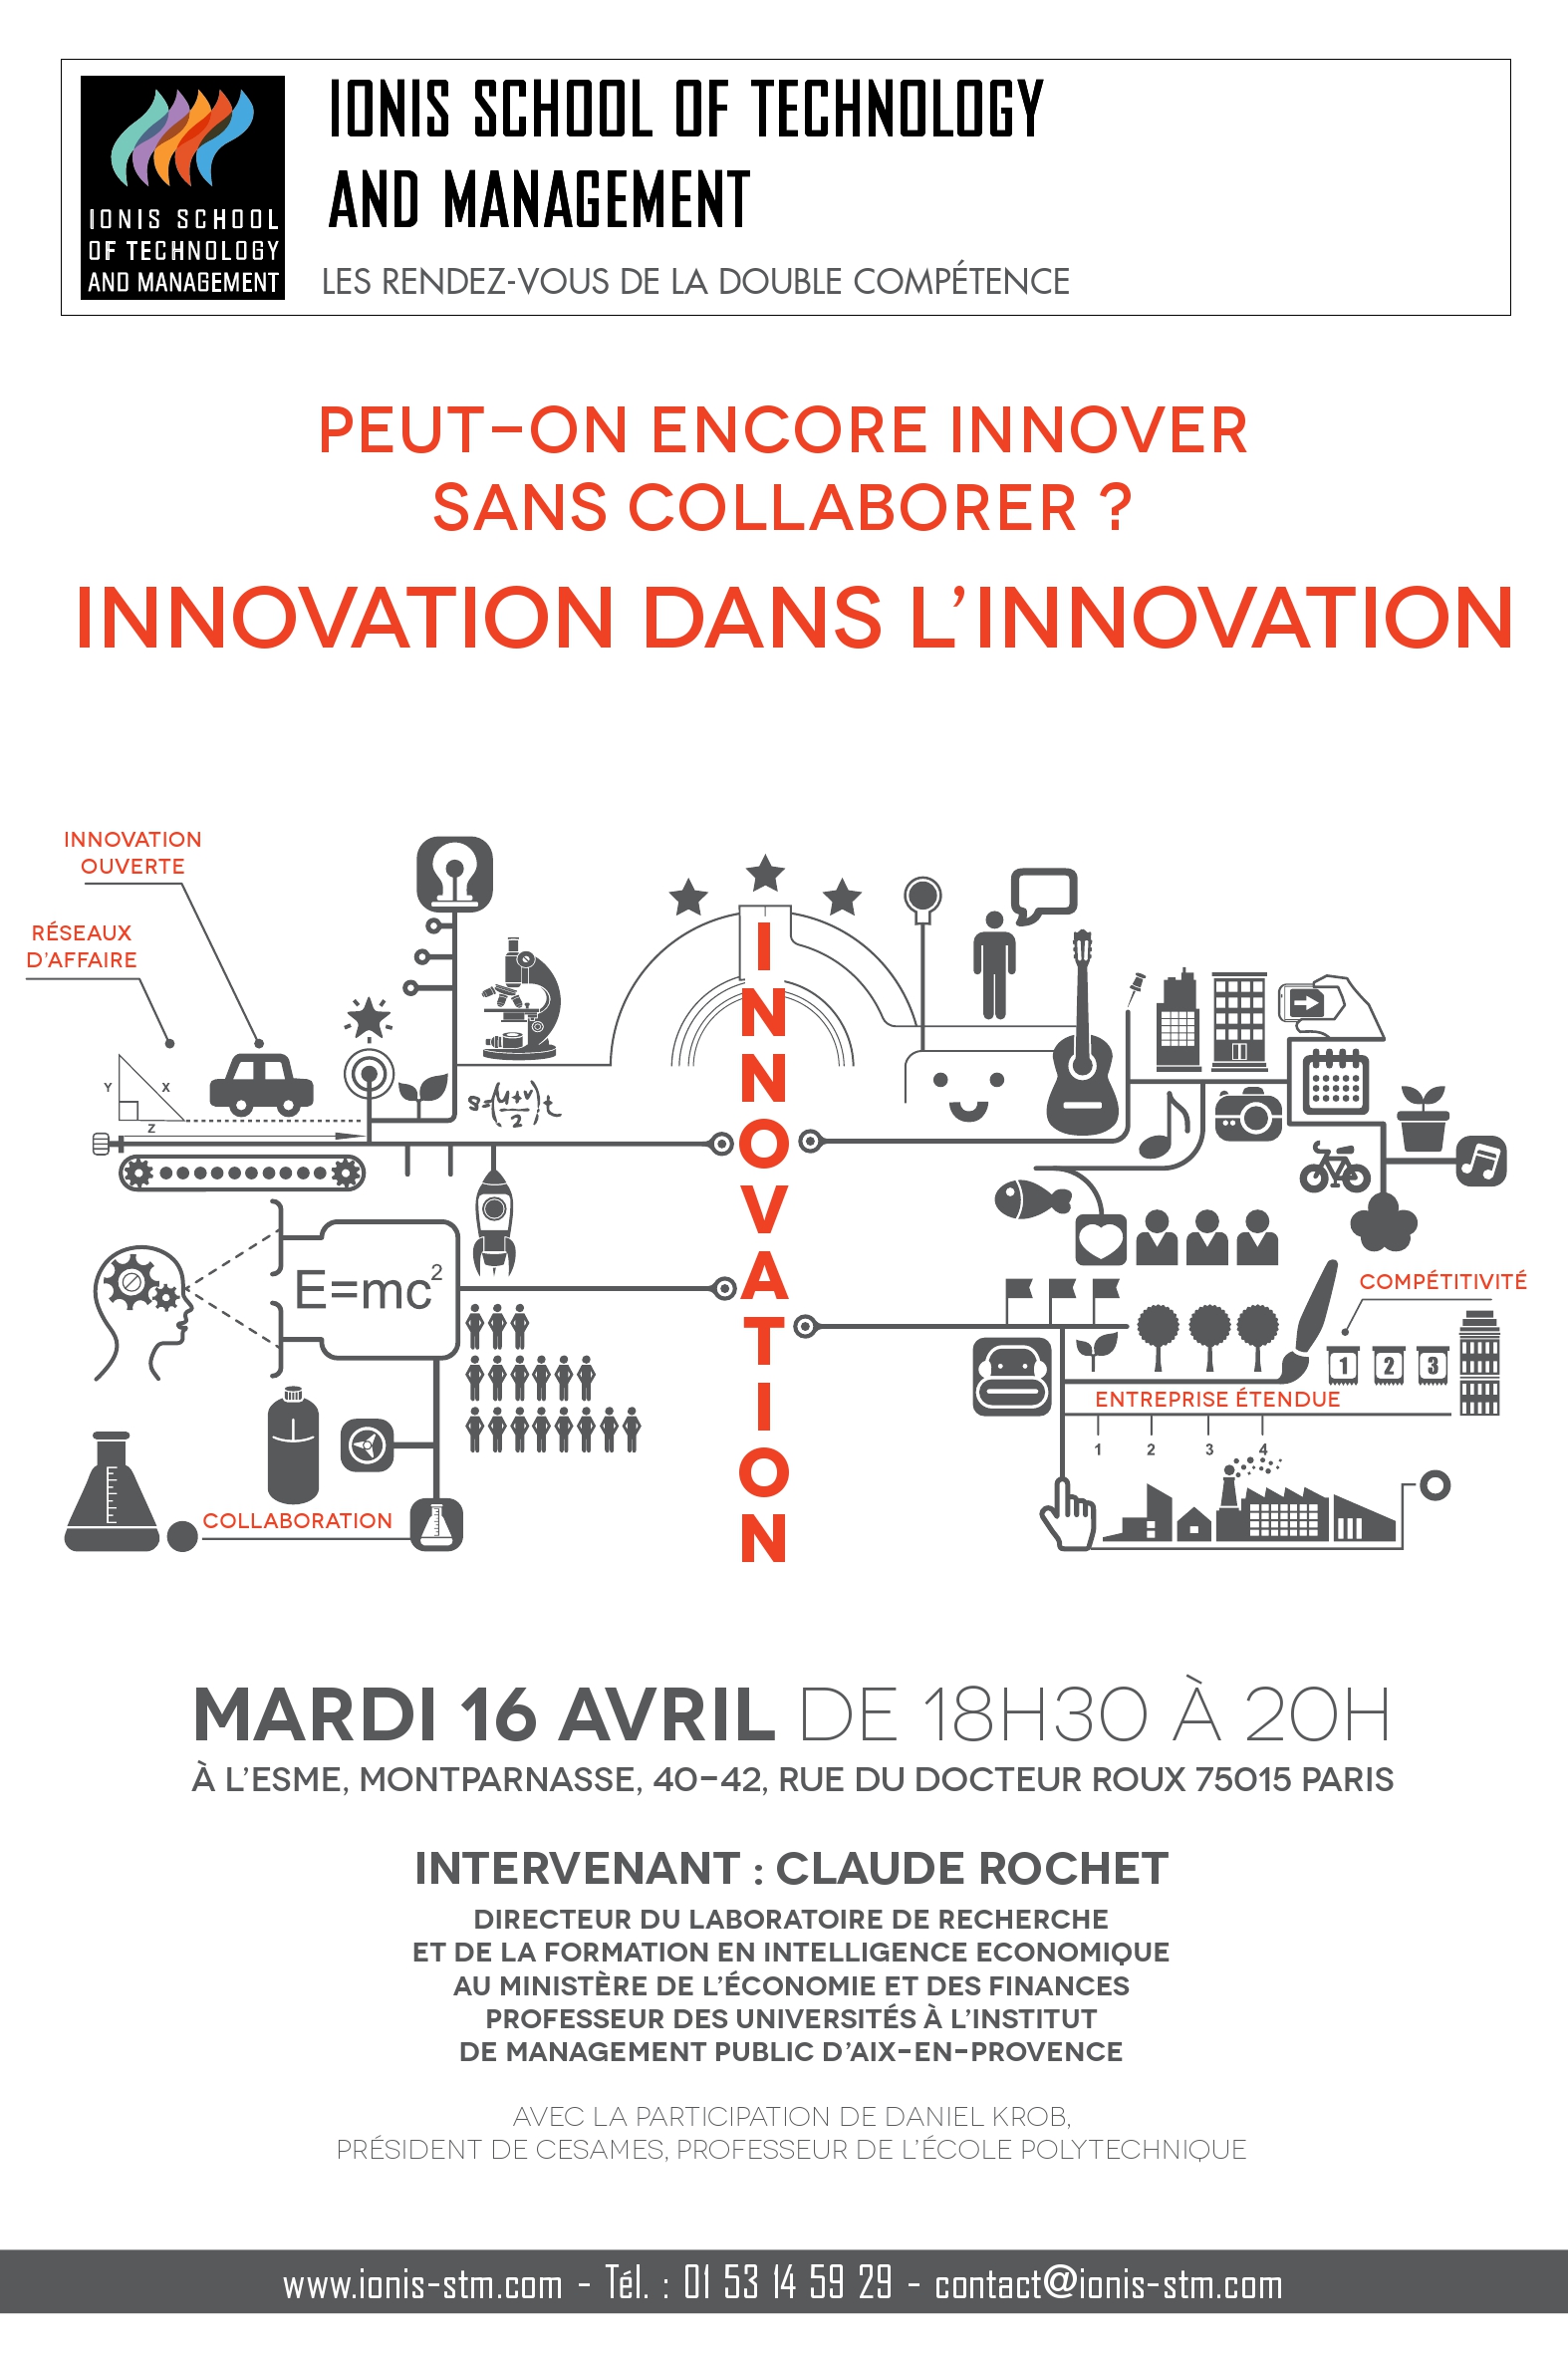 ISTM-affiche 40X60-conference innovation_bdef.jpg